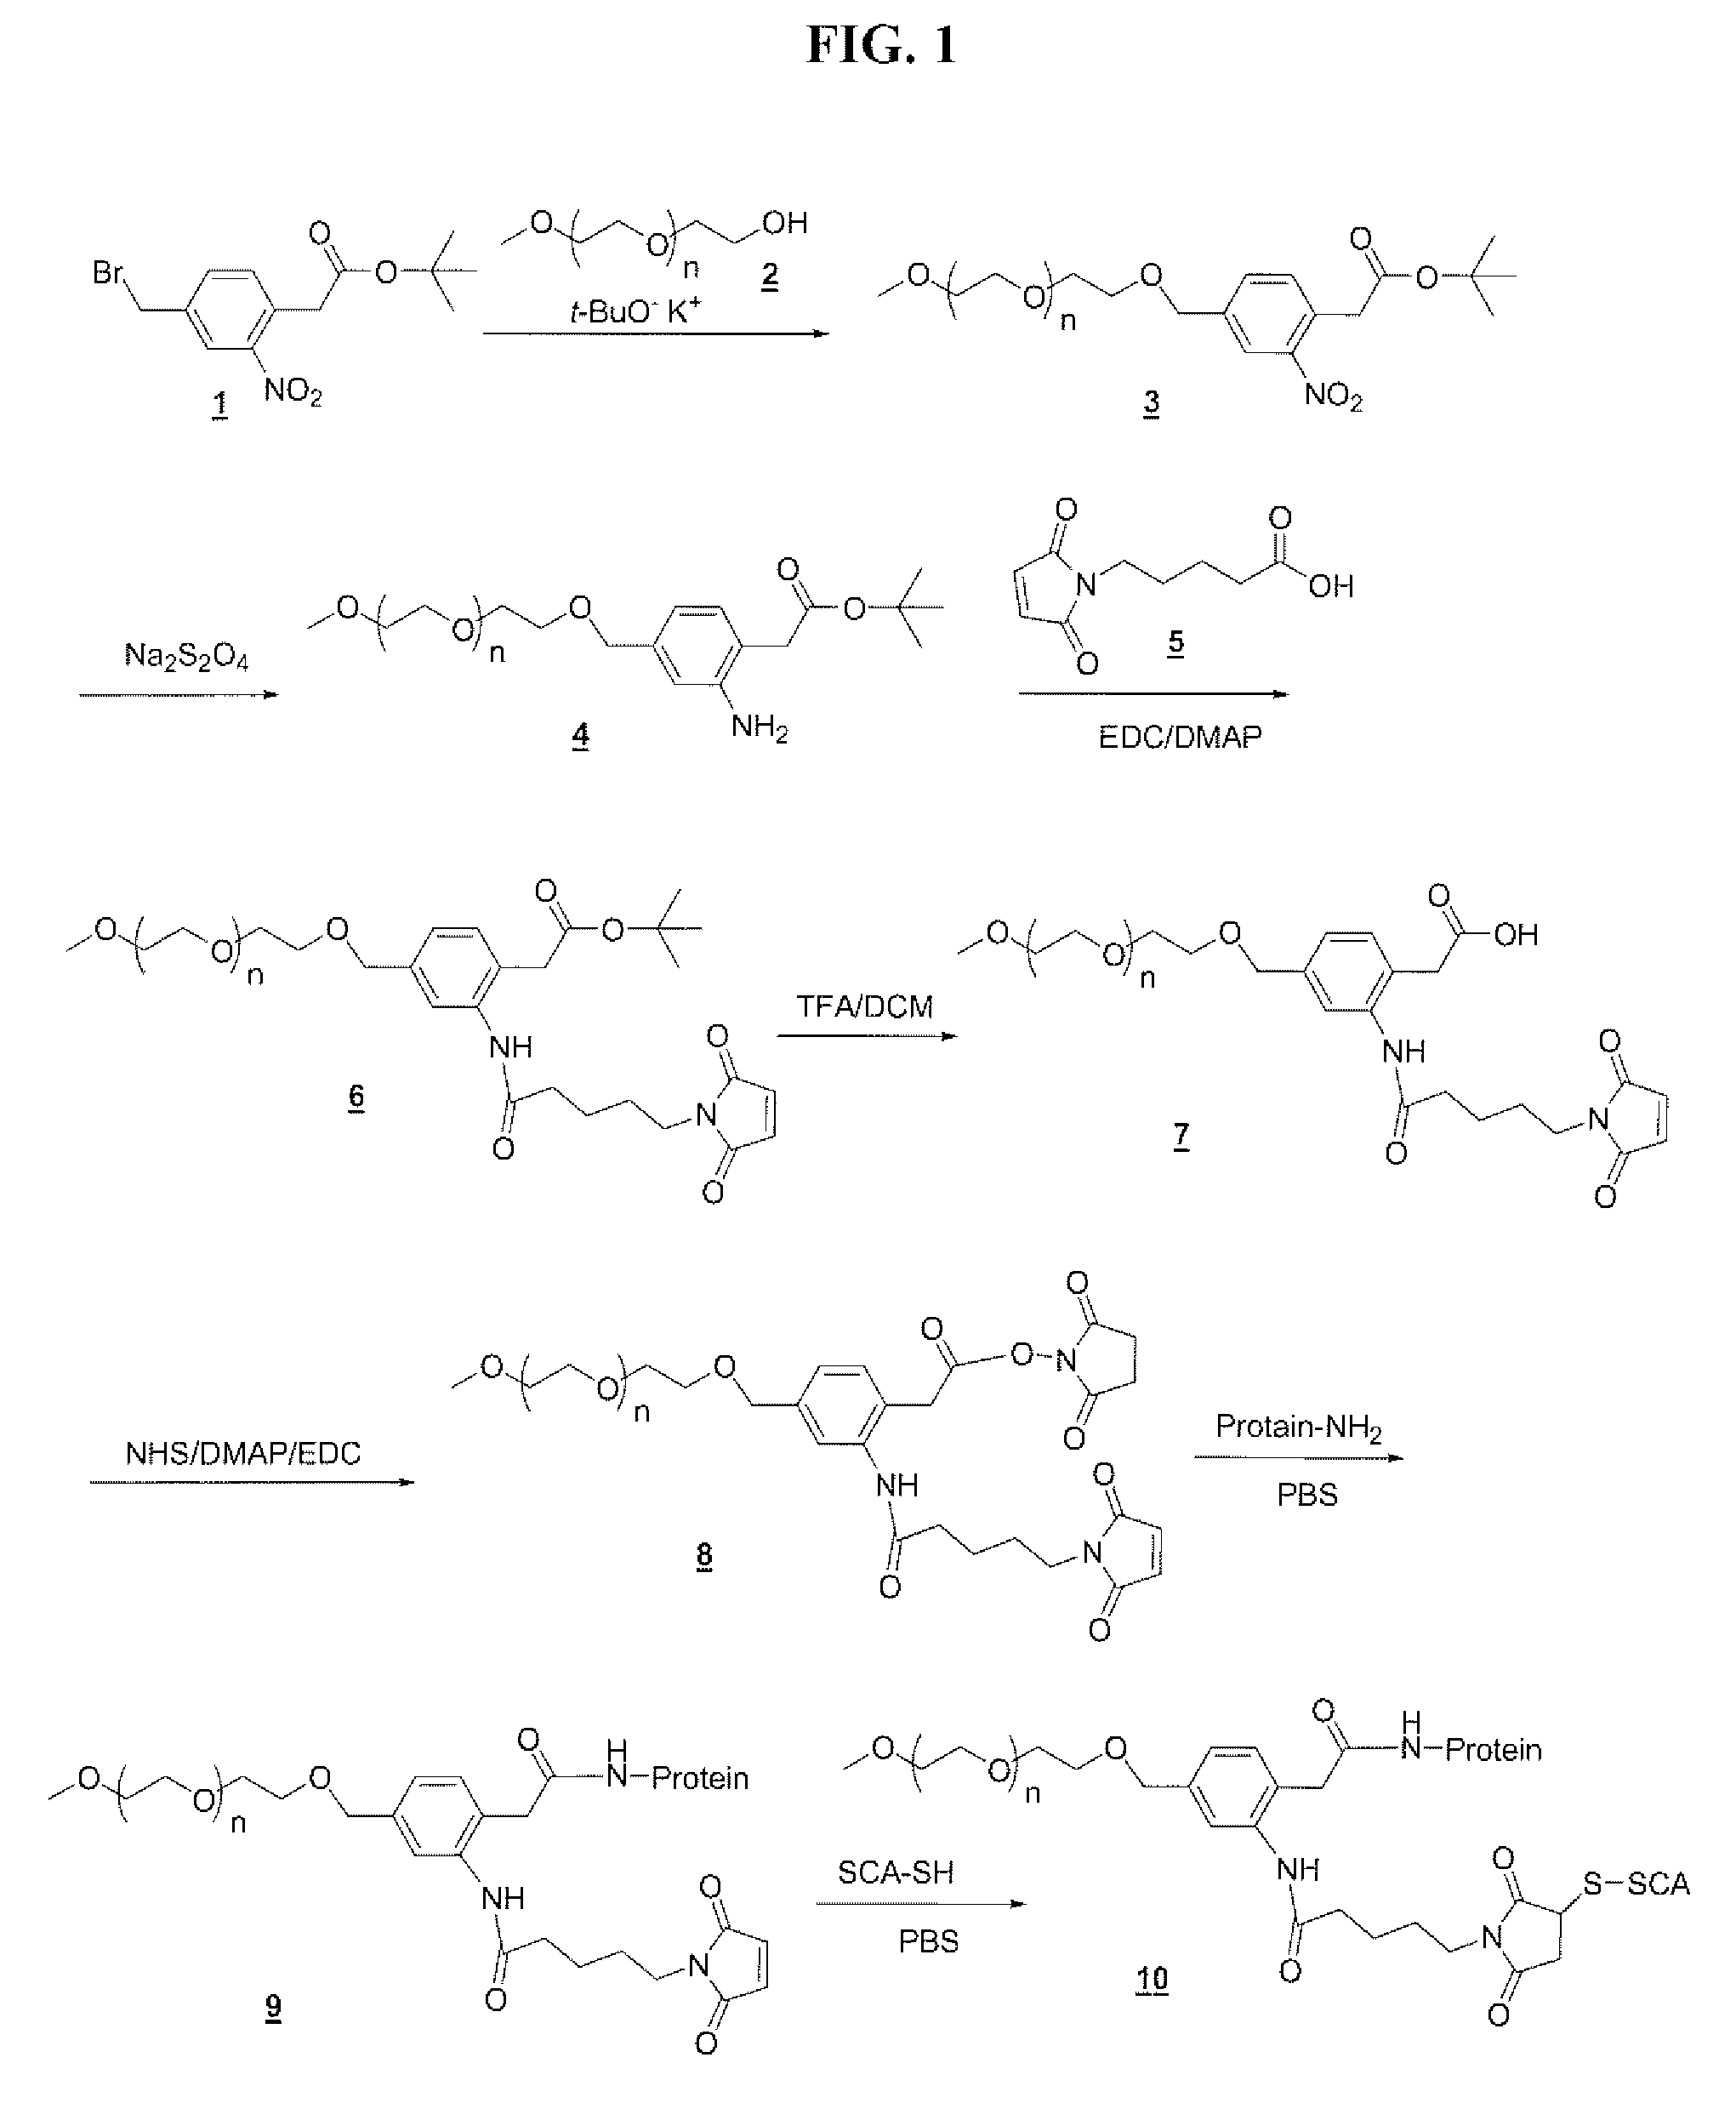 Polymeric drug delivery system containing a multi-substituted aromatic moiety